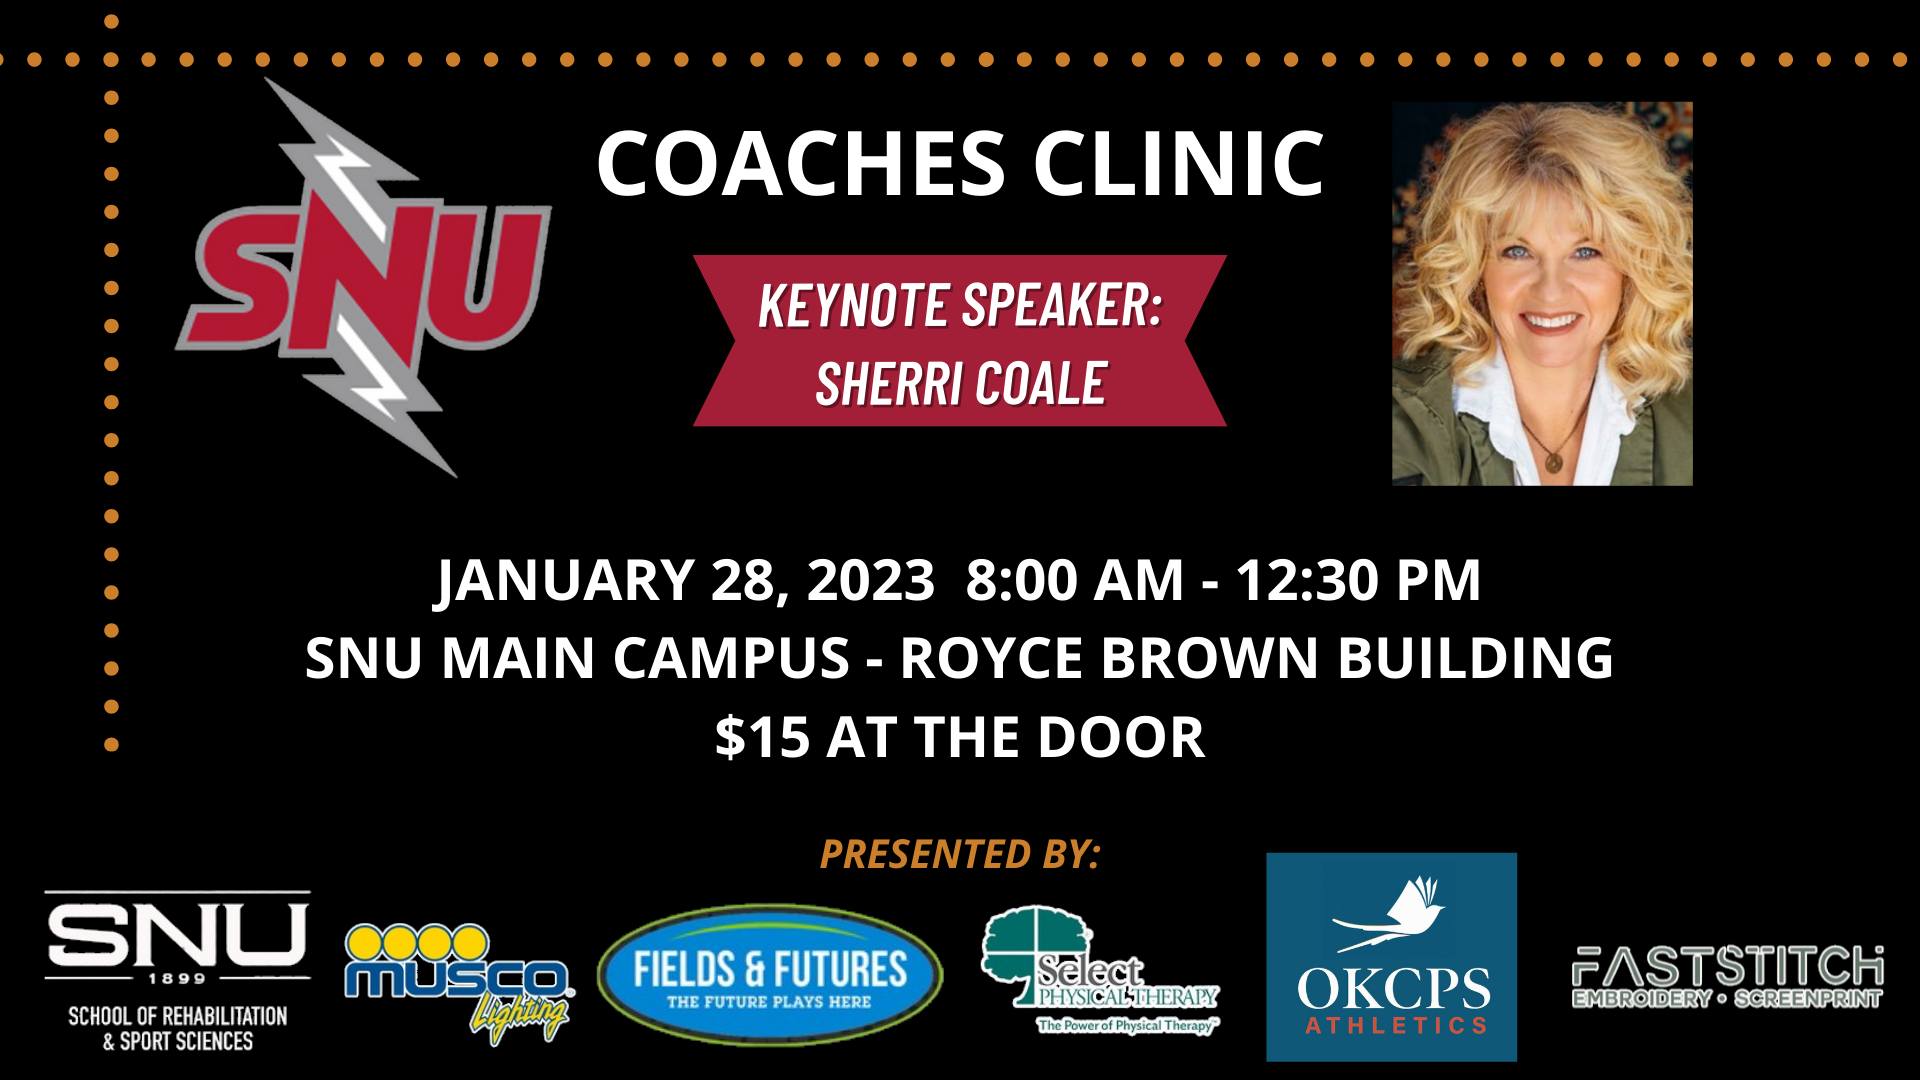 Coaches Clinic hosted by Southern Nazarene University with keynote Speaker Sherri Coale